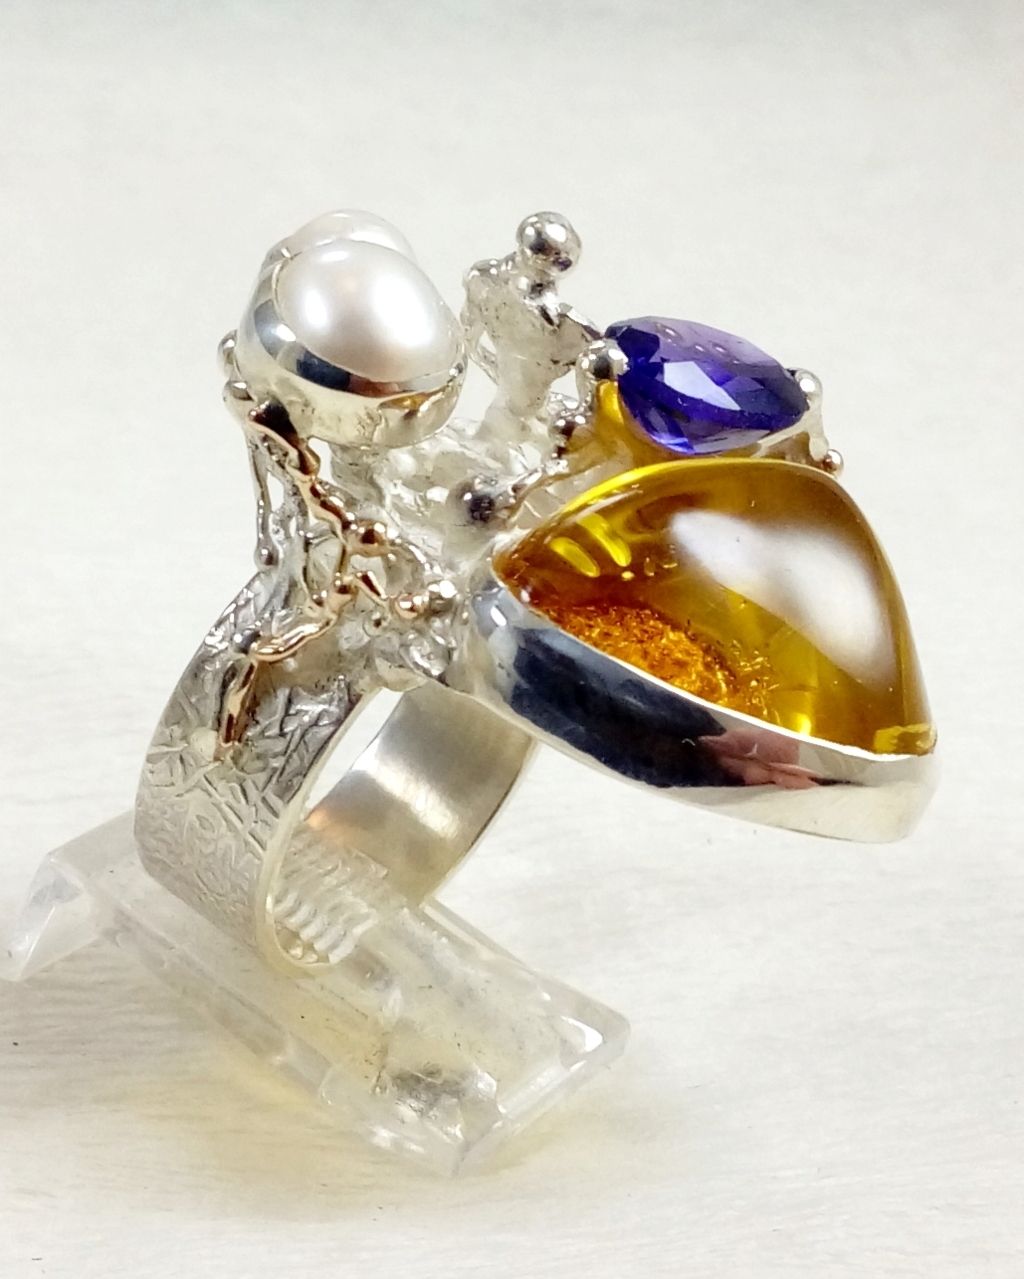 Gregory Pyra Piro ring 3045, Gregory Pyra Piro art jewellery, art nouveau inspired art, one of a kind jewellery with amethyst and amber, handcrafted jewellery with gemstones and pearls, who still makes one of a kind jewelry, jewellery sold in art galleries, jewellery sold in craft galleries, mixed metal jewellery with gemstones and pearls, artists during lockdown, where do I find still active vintage jewelry artists, how do I find vinatage designers and artists that are still active, where tojewelry with retro style for my grandmotherjewellery online, where to find vintage jewelry artist that is still active, where to find fine craft product styles from the 80s and 90s, buy fine craft online, rings made during lockdown